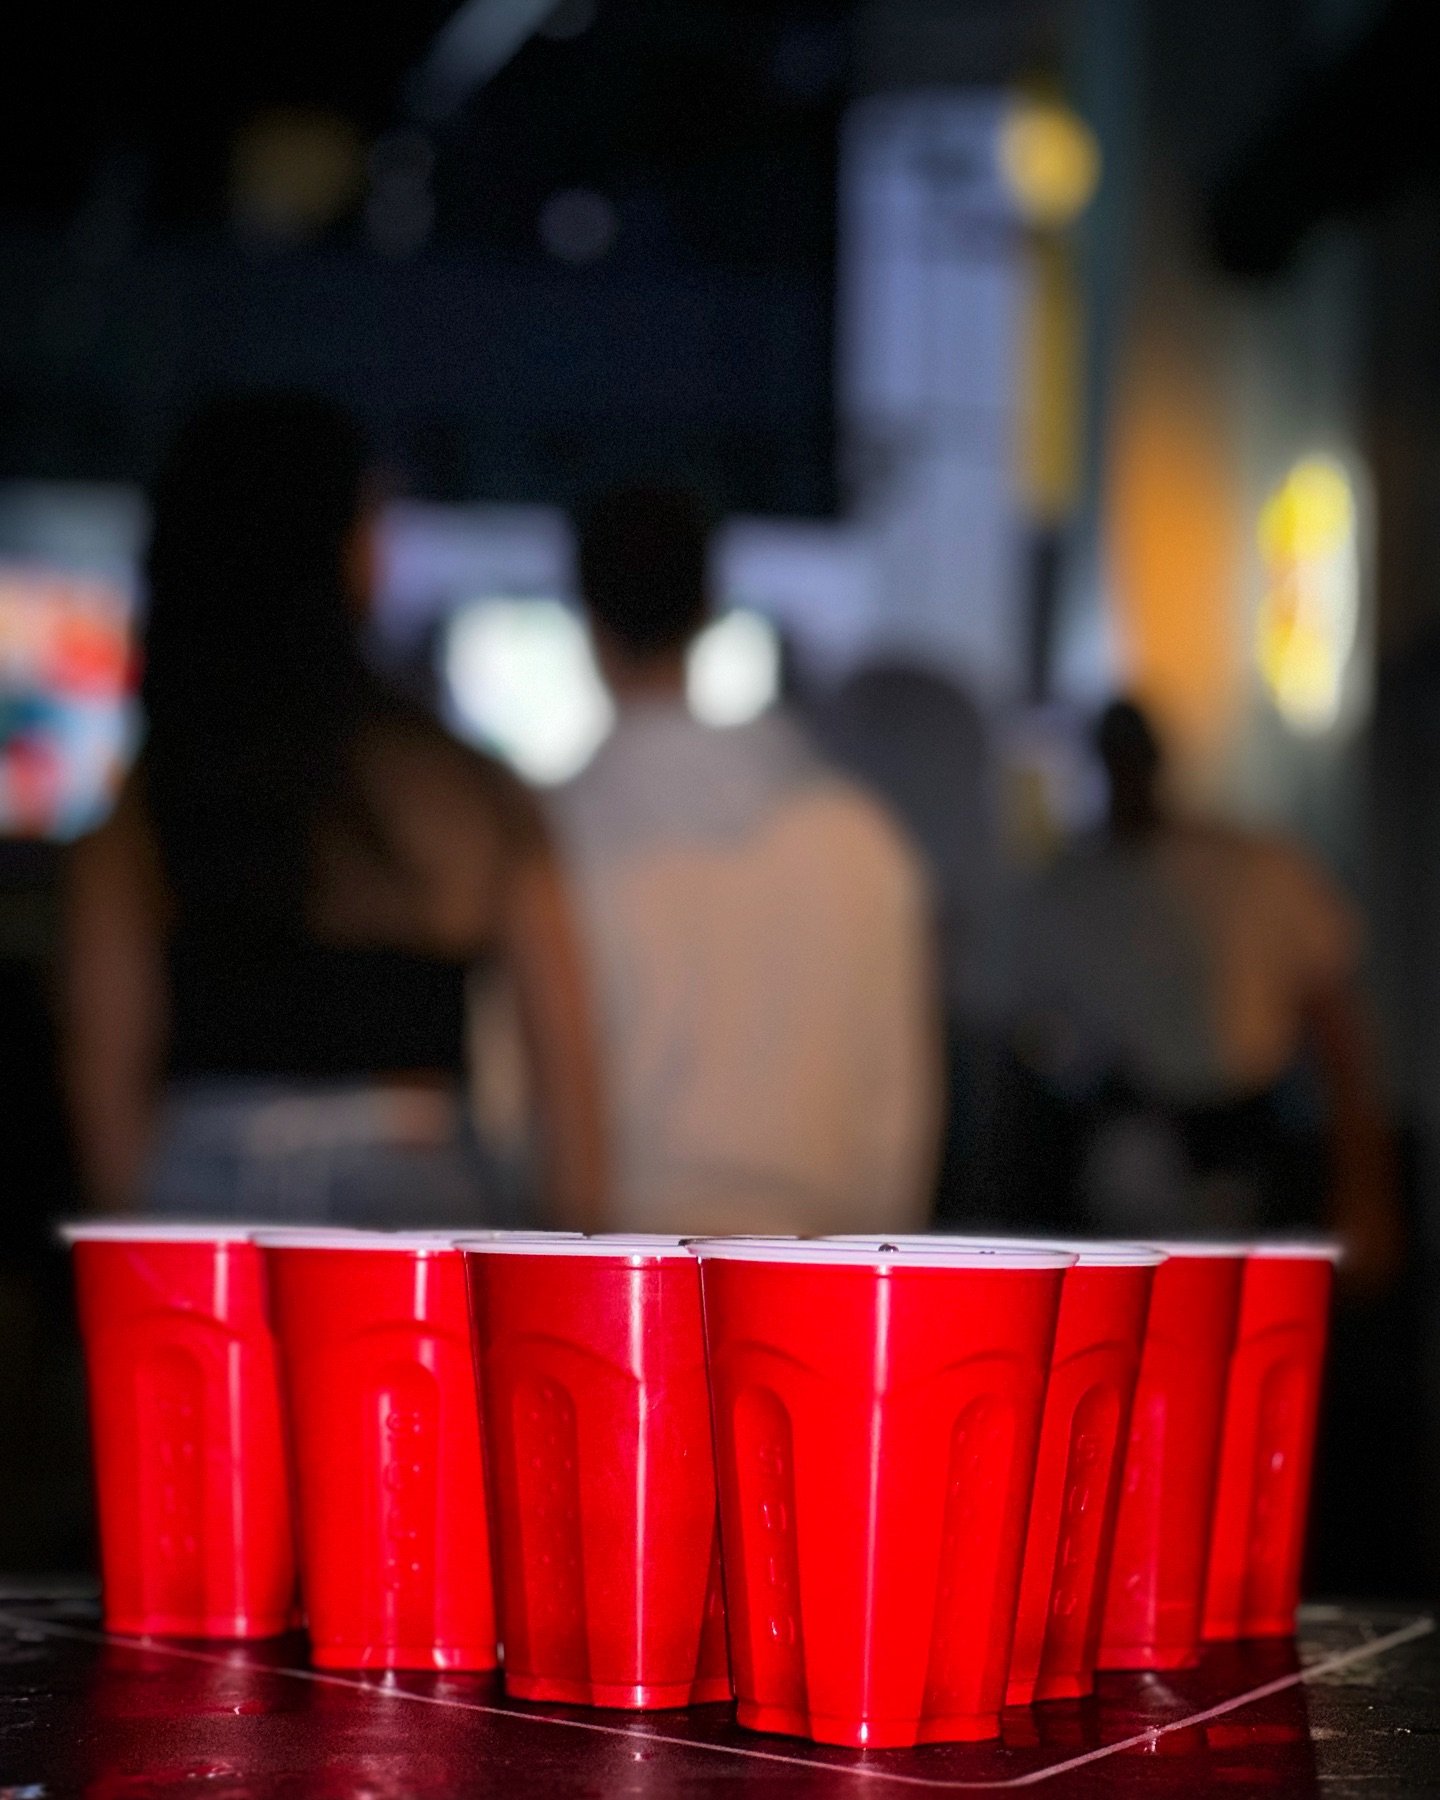 Think you have what it takes to dominate the table? Find out tomorrow at our April Beer Pong Tournament‼️ Thanks to our friends @dobeltequila this months winners will take home 2 tickets to the @wellsfargogolf Championship Tournament! ⛳️ The stakes a